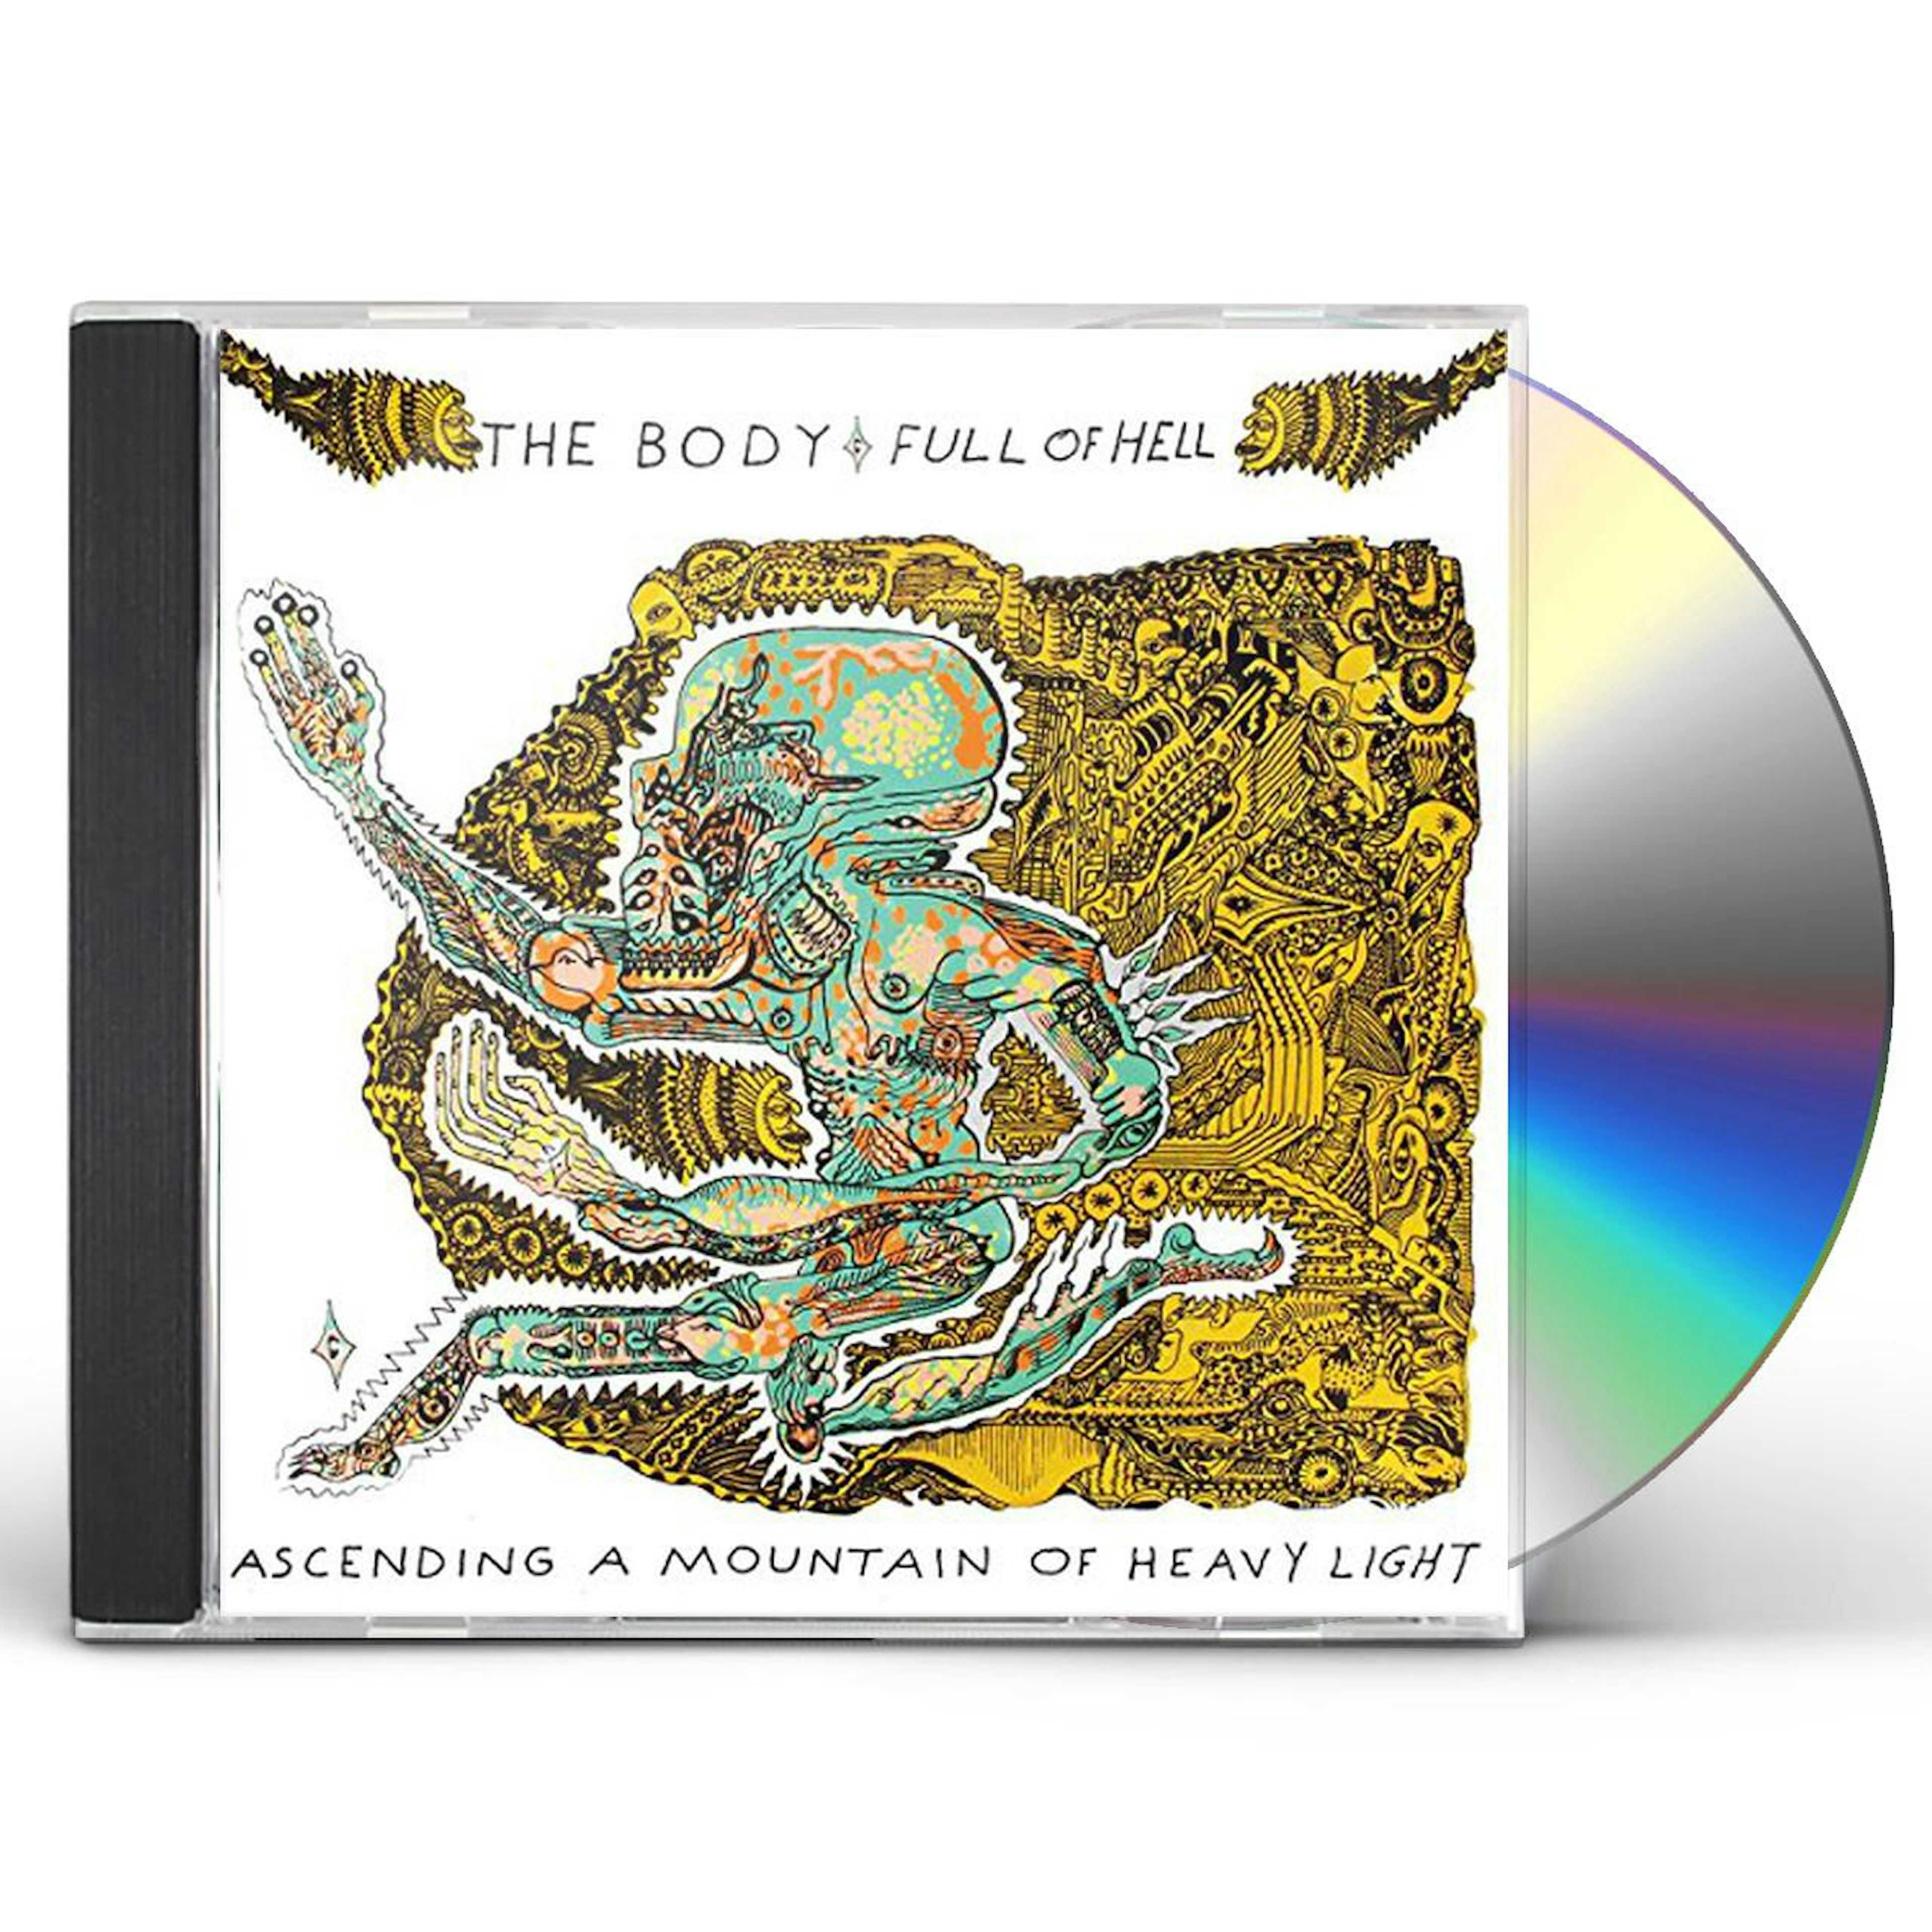 Full of and The Body ASCENDING A MOUNTAIN OF LIGHT CD